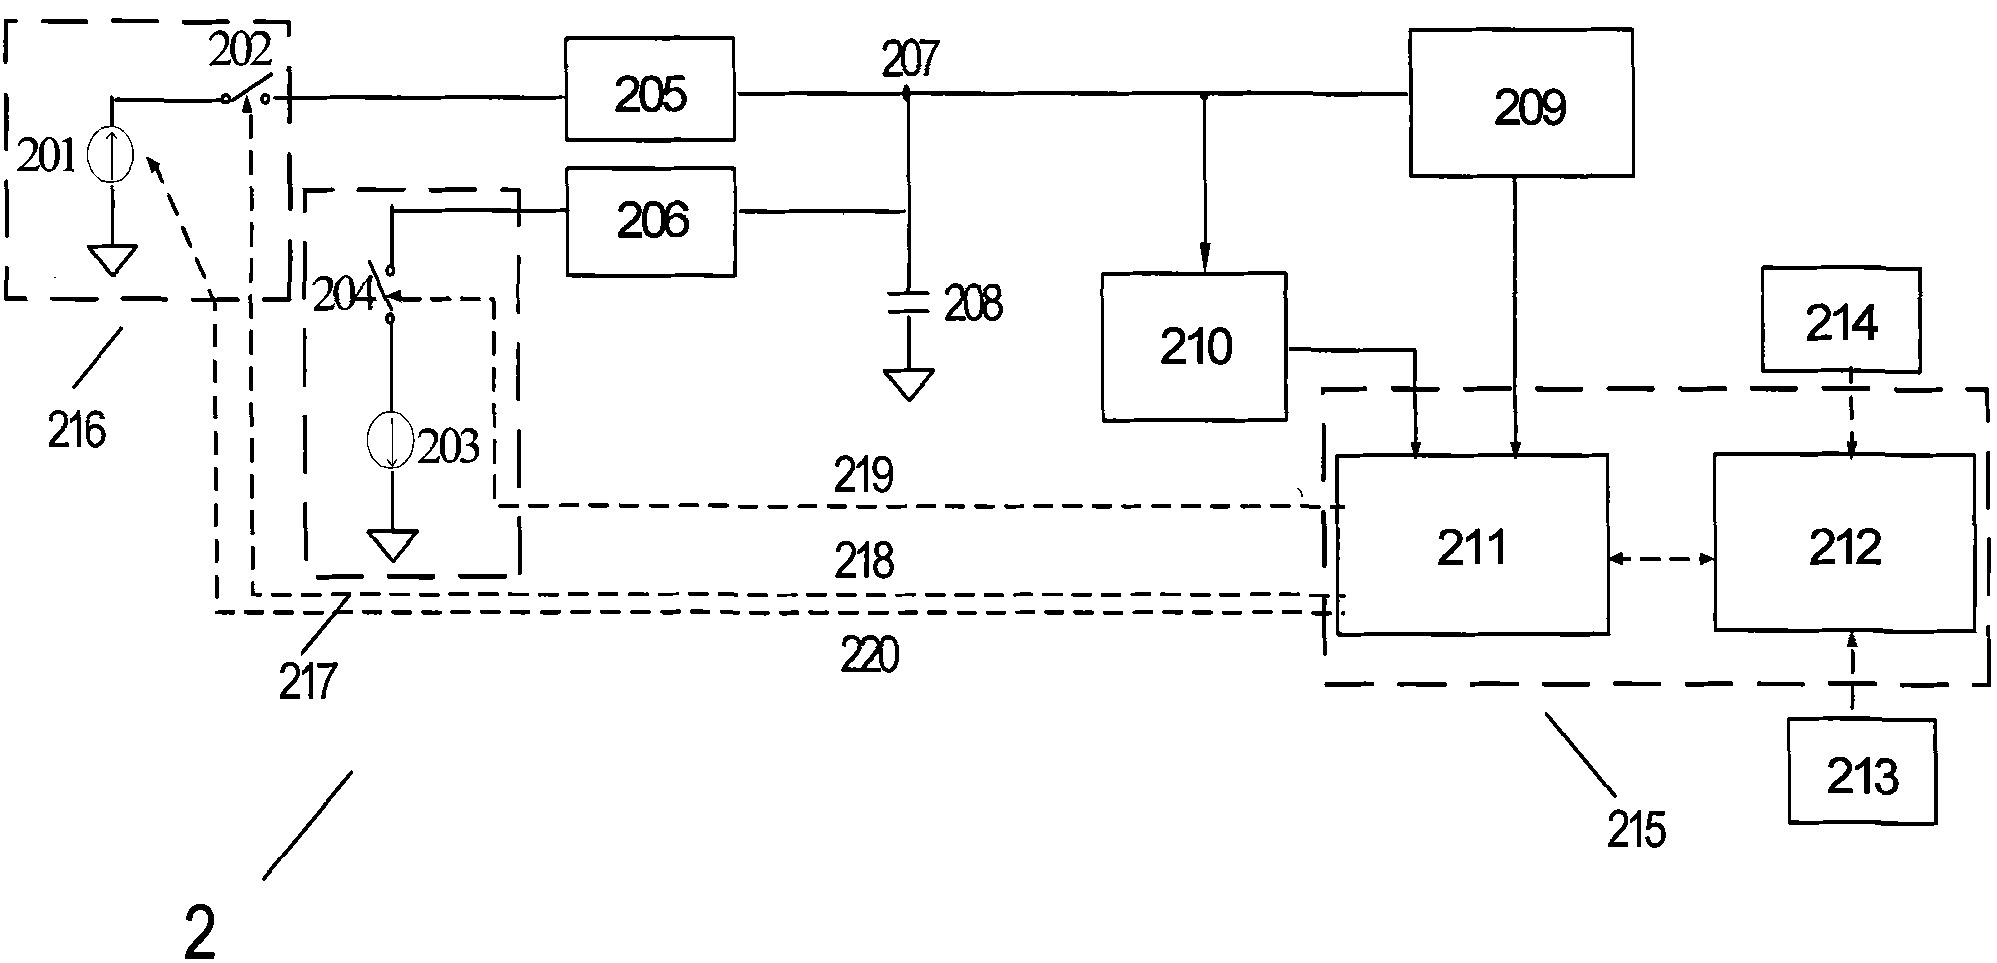 Measurement device with function of measuring capacitance